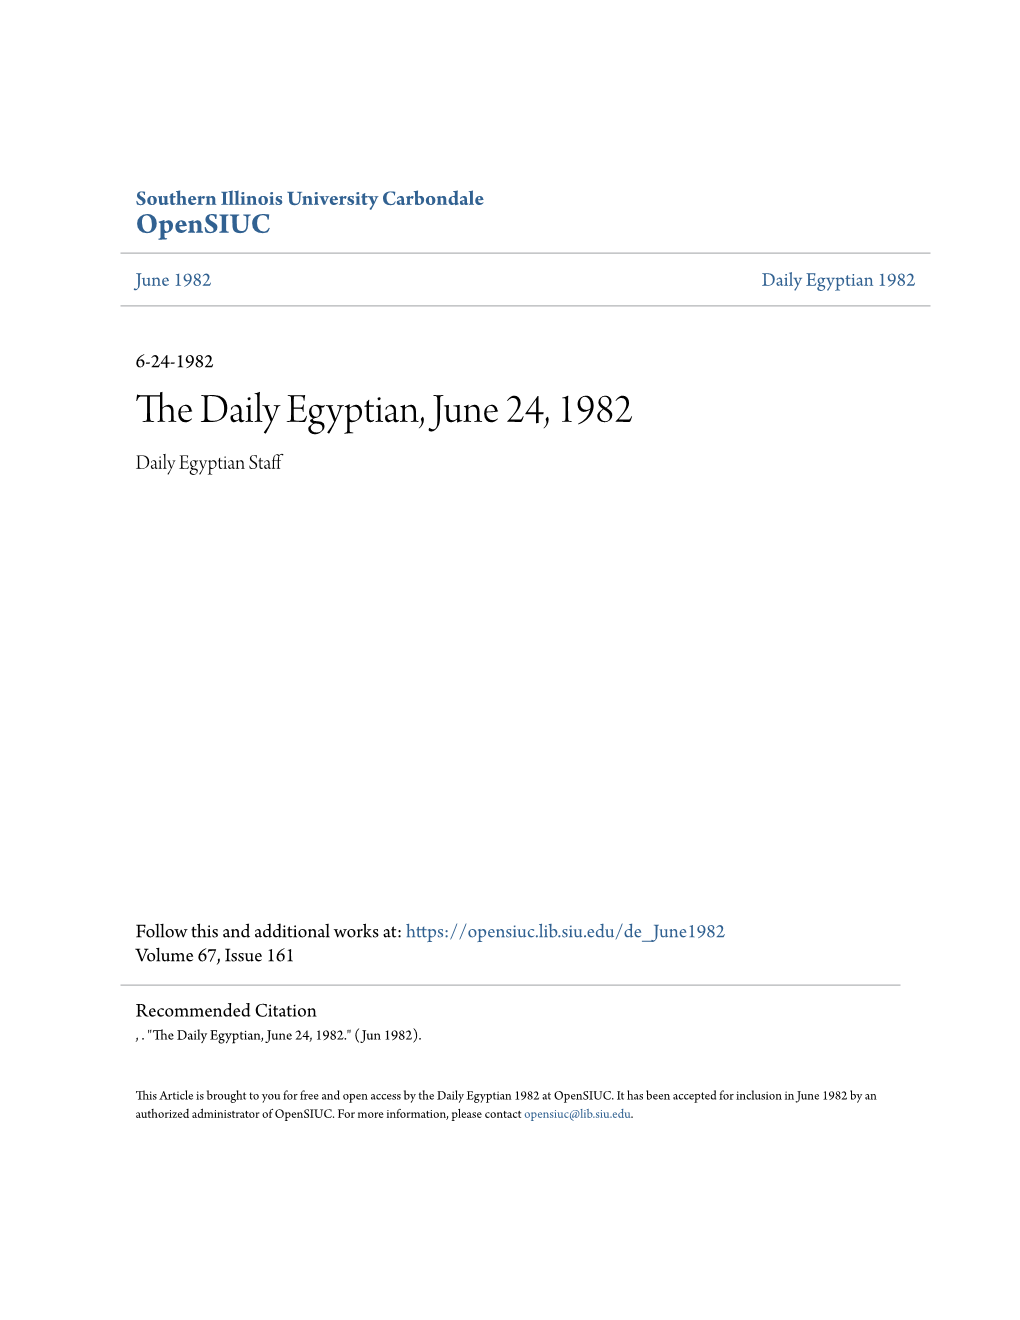 The Daily Egyptian, June 24, 1982